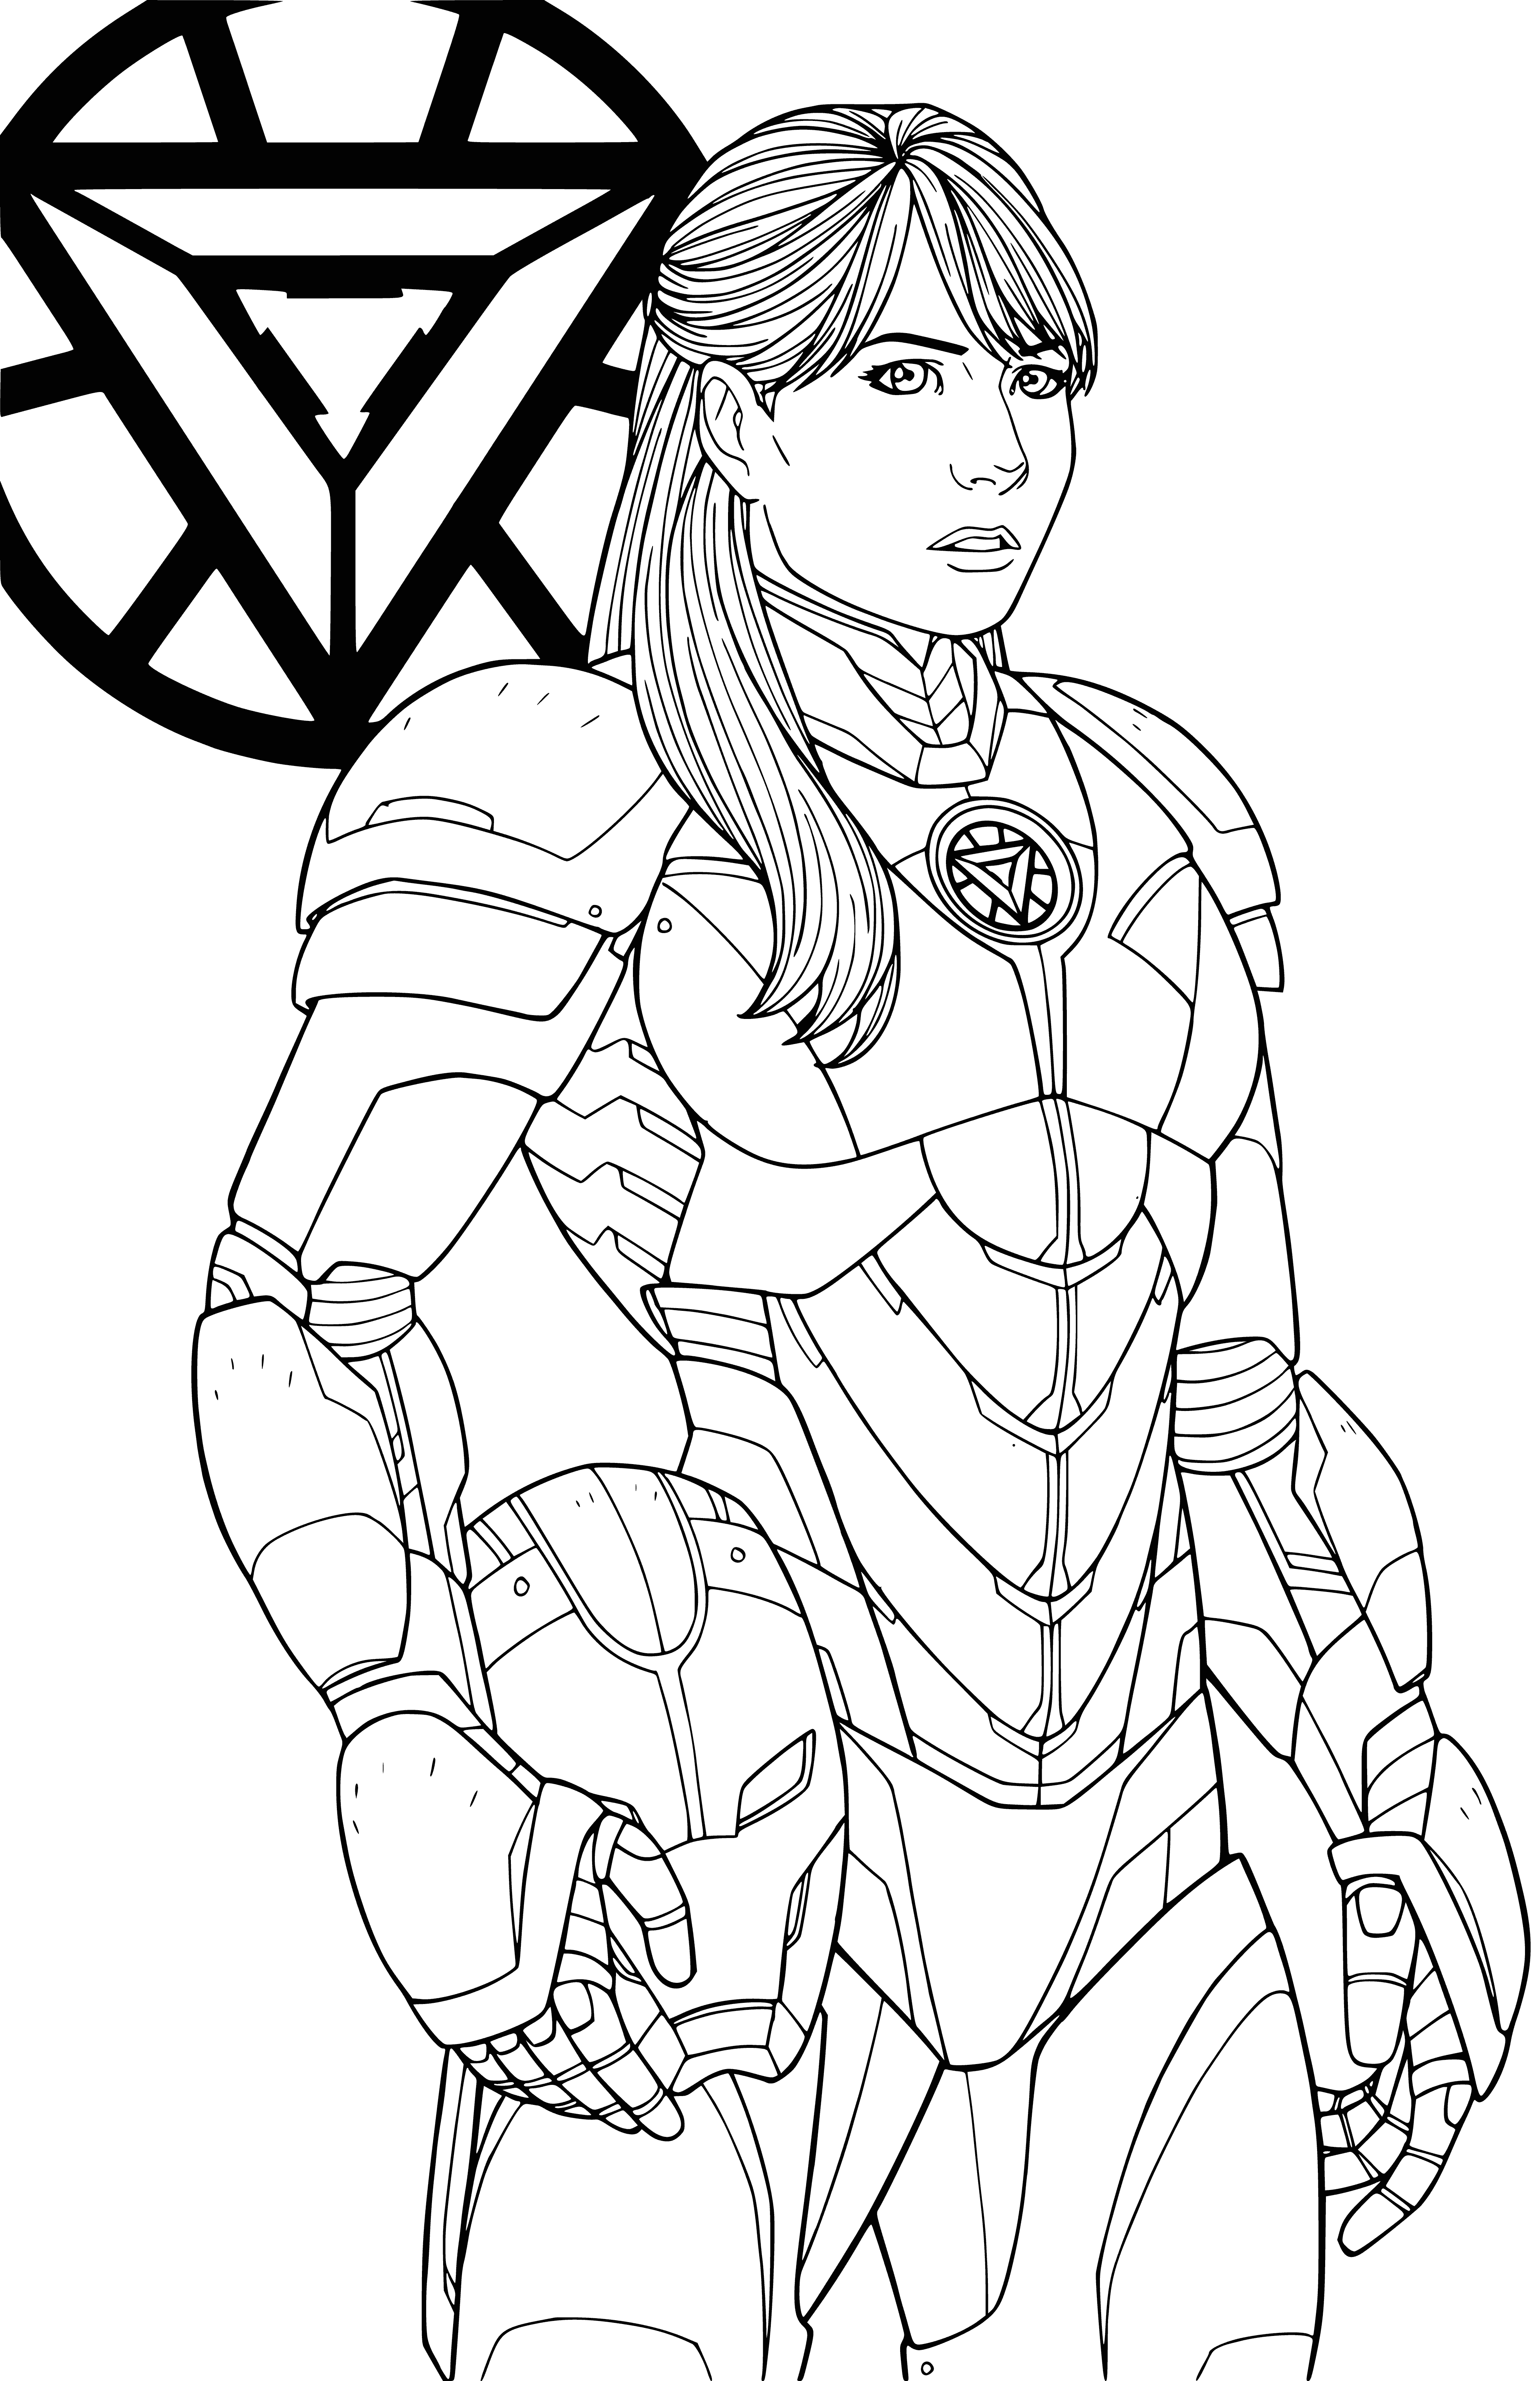 Pepper Potts coloring page